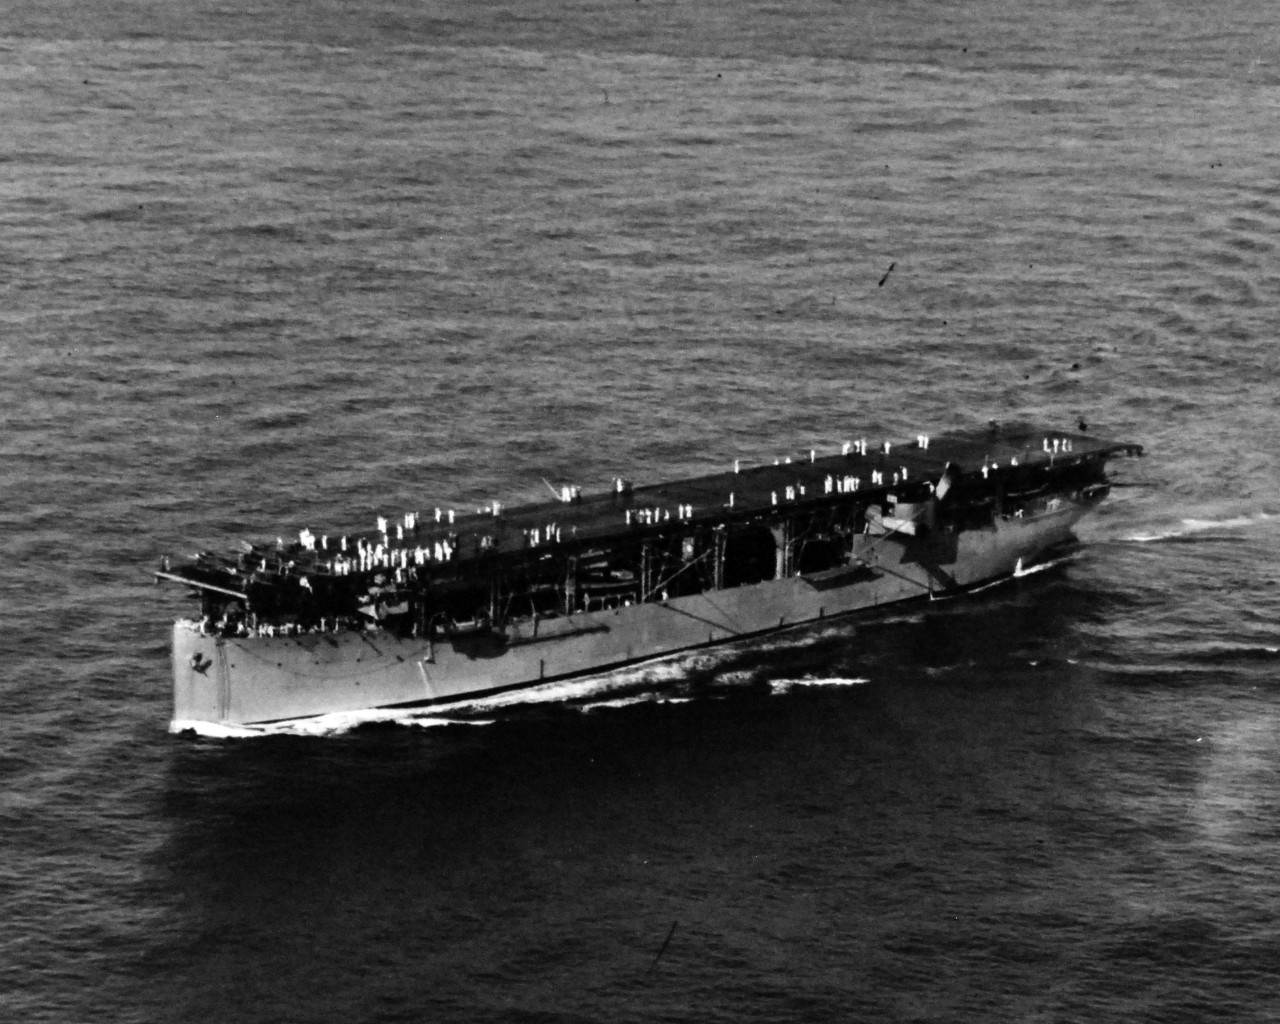 80-G-410459:  USS Langley (CV-1), 1925.    Aircraft carrier shown approximately 100 miles south west of Pearl Harbor, Territory of Hawaii, 26 April 1925.  Official U.S. Navy photograph, now in the collections of the National Archives.   (2014/02/27).    